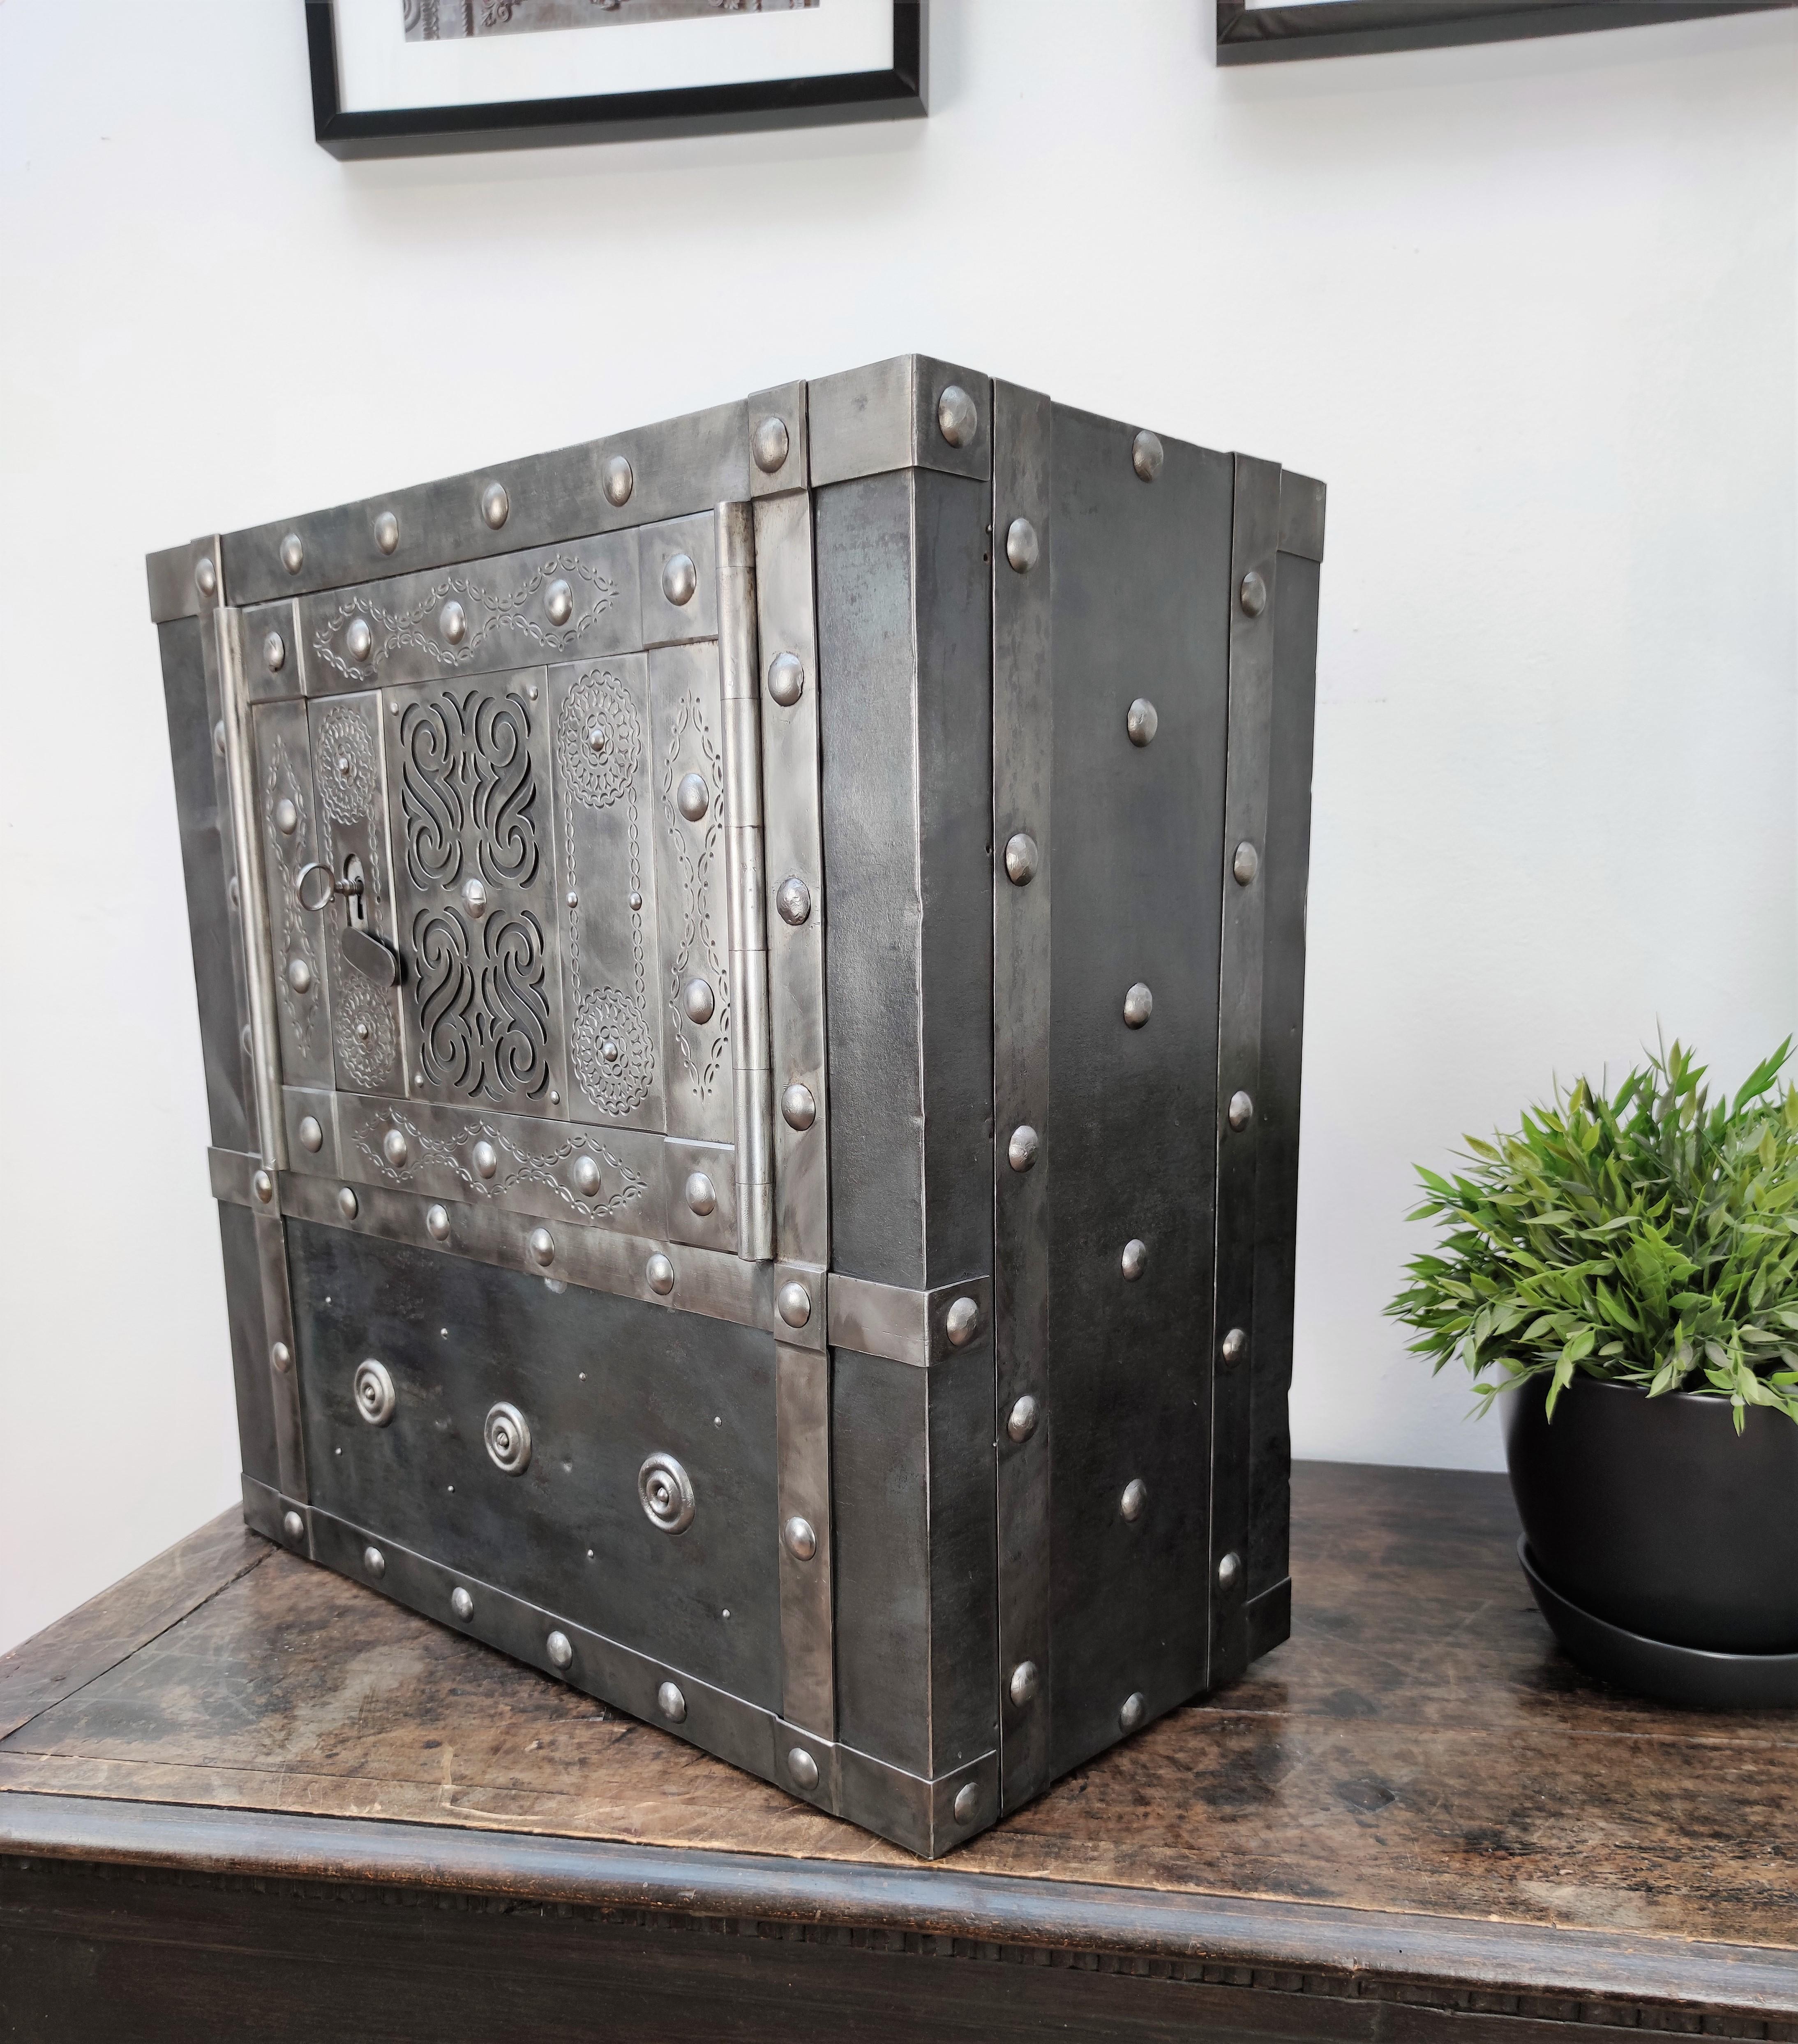 Italian 18th Century Wrought Iron Studded Antique Safe Strongbox Dry Bar Cabinet 2